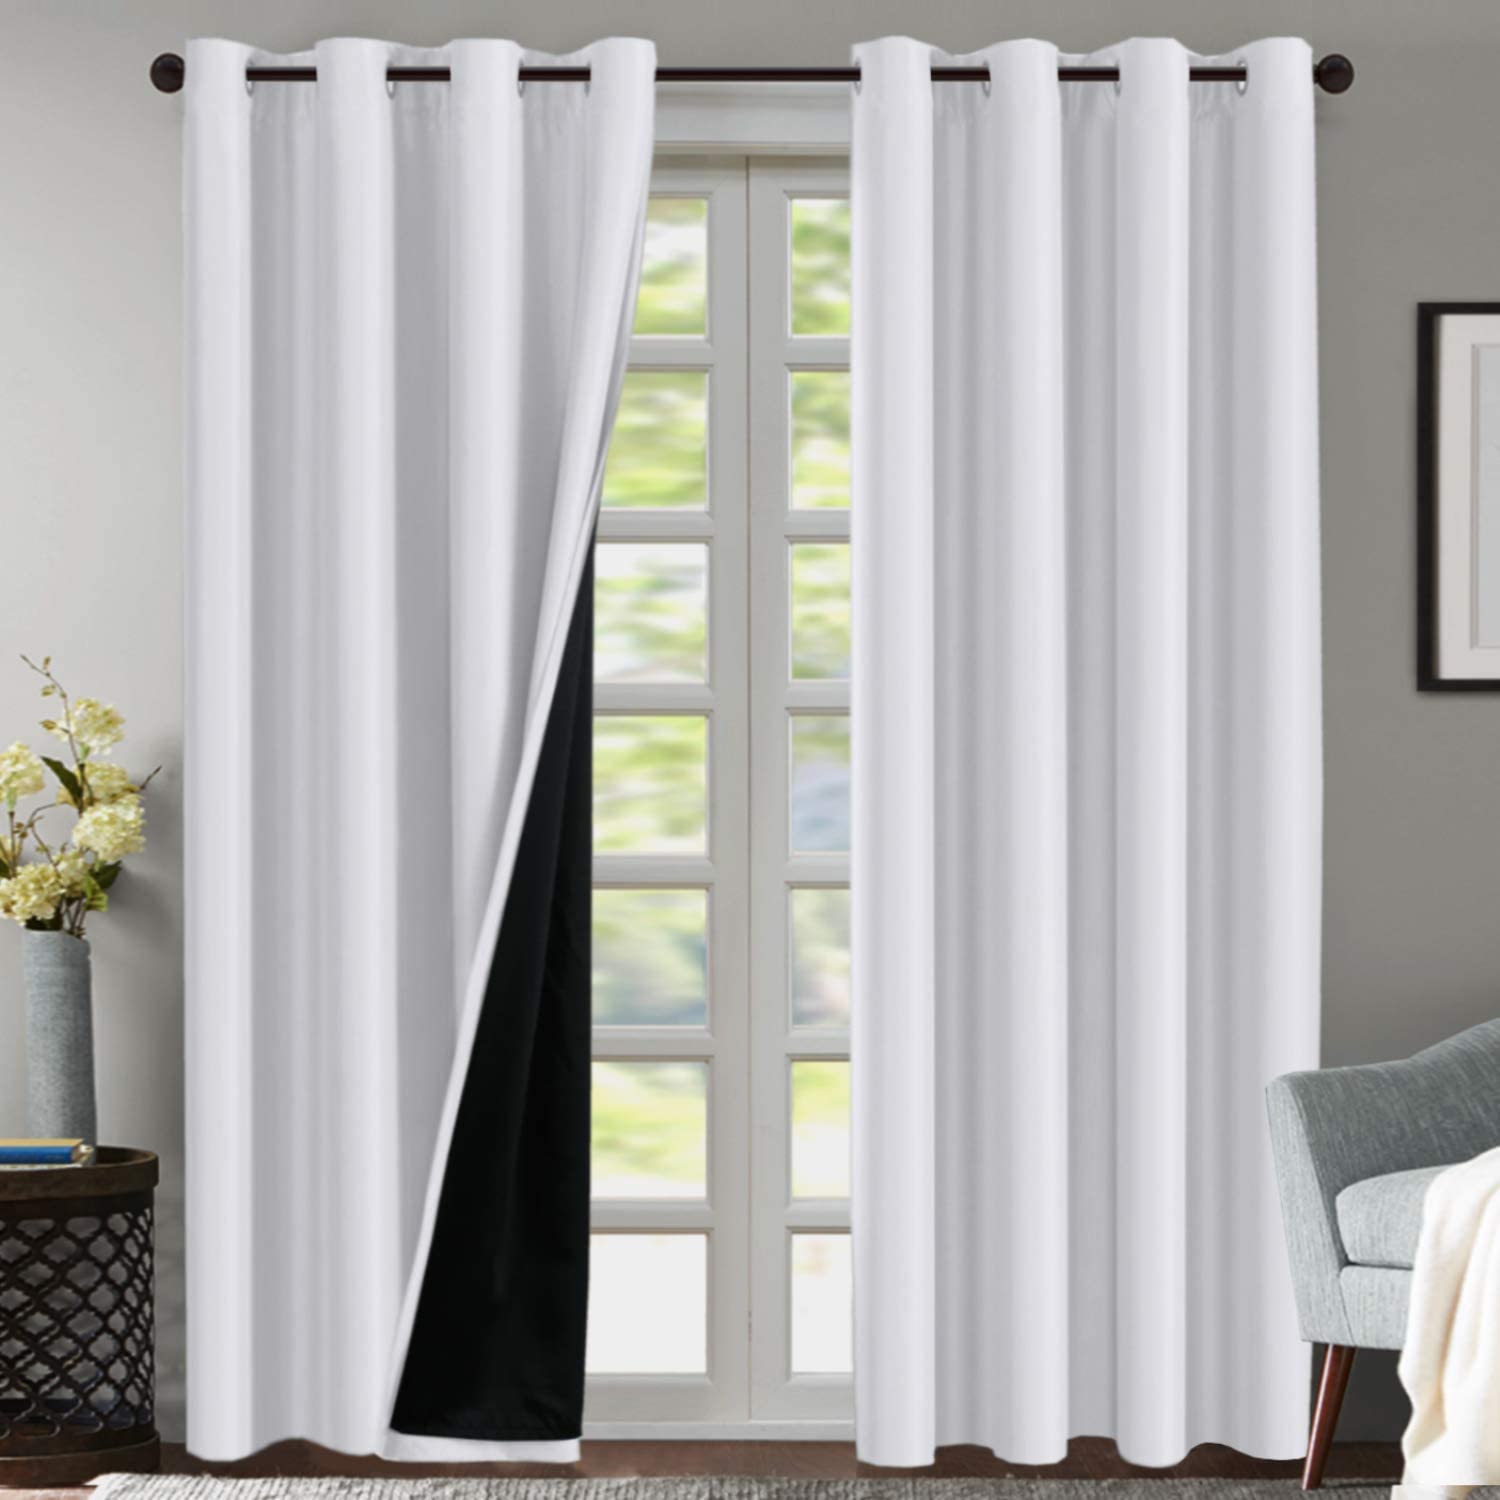 Flamingo P Double Layer Thermal Curtains